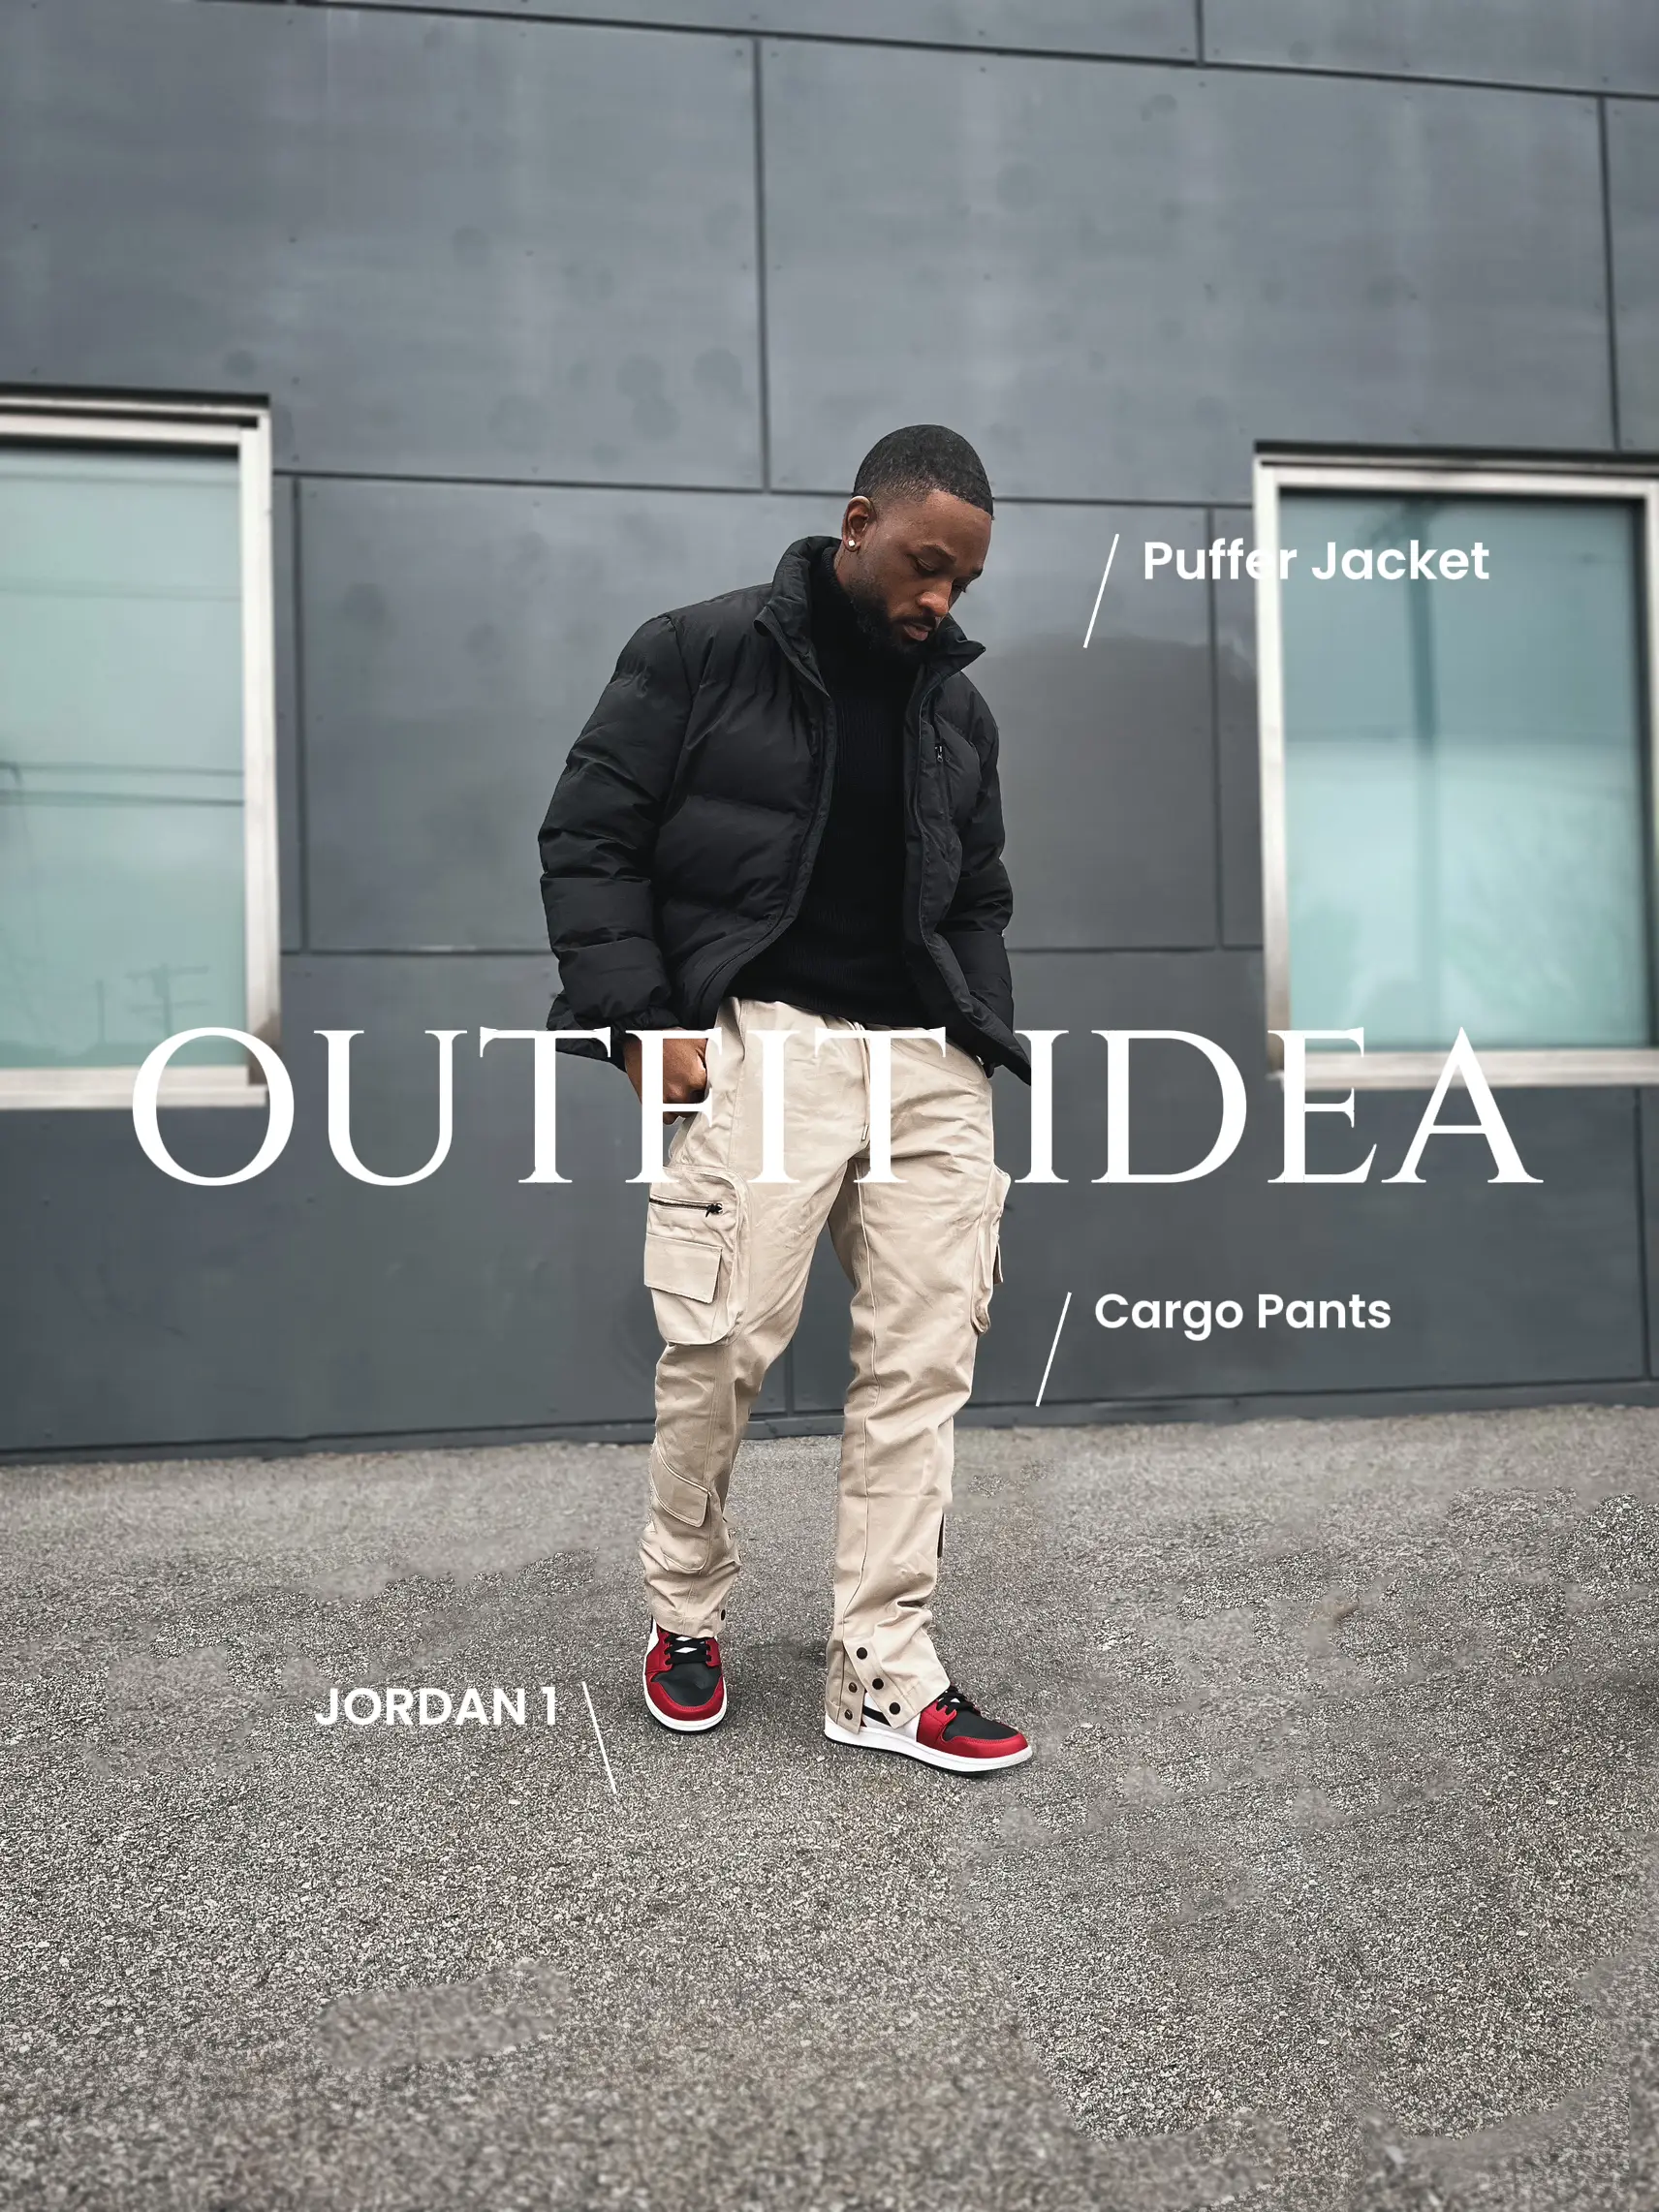 How to style cargo pants and a puffy jacket